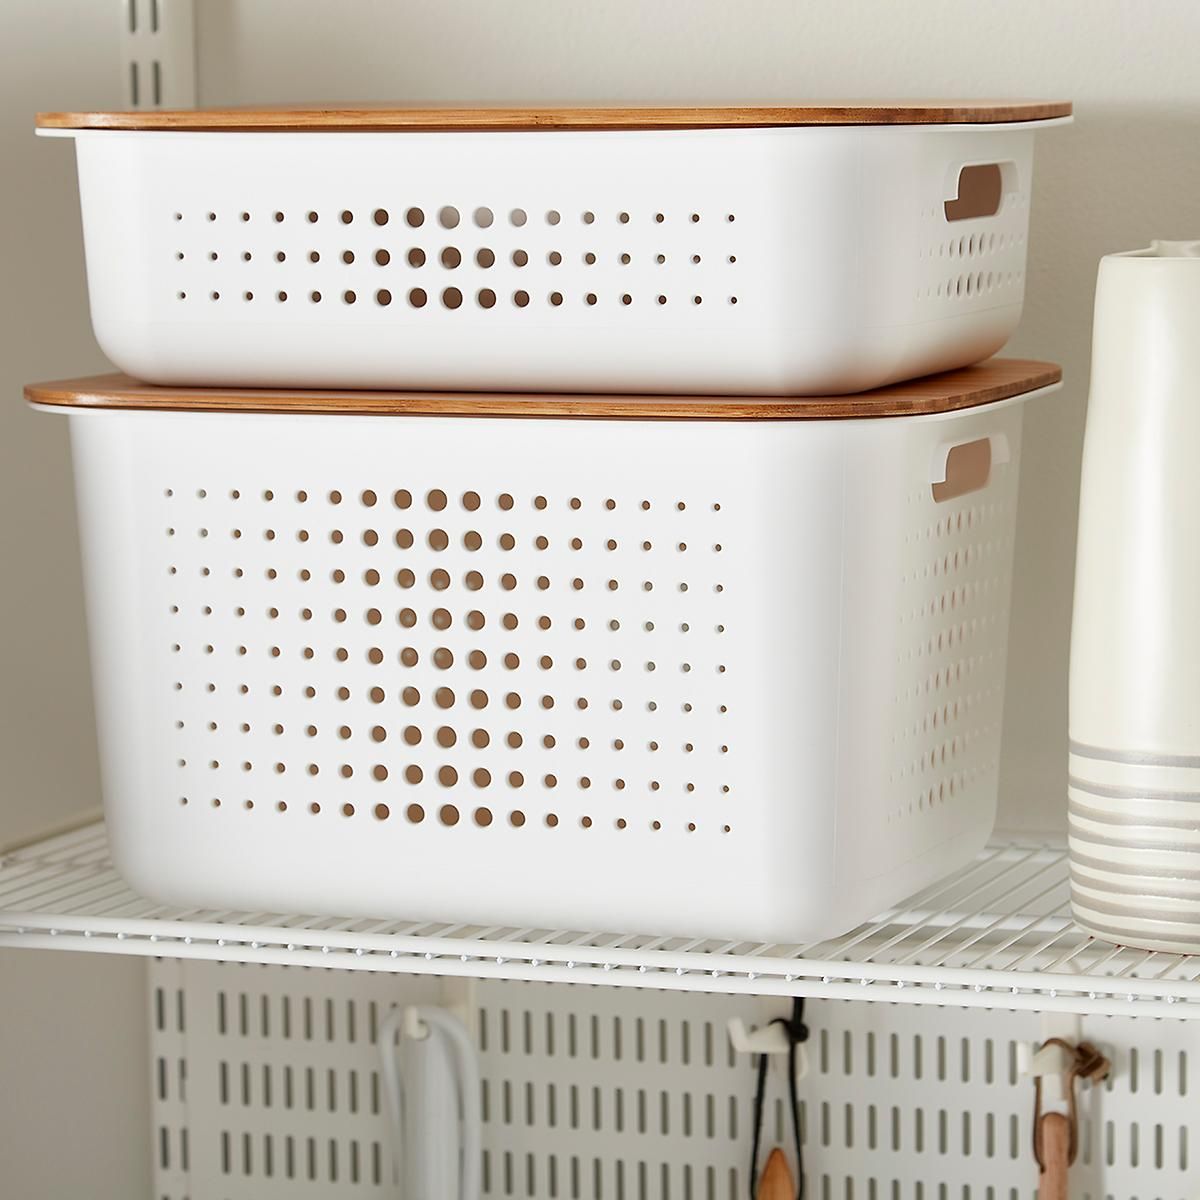 BAMBOO STORAGE BASKETS-3 SIZES-MASSIVE SALE BOXING DAY SALE NOW!